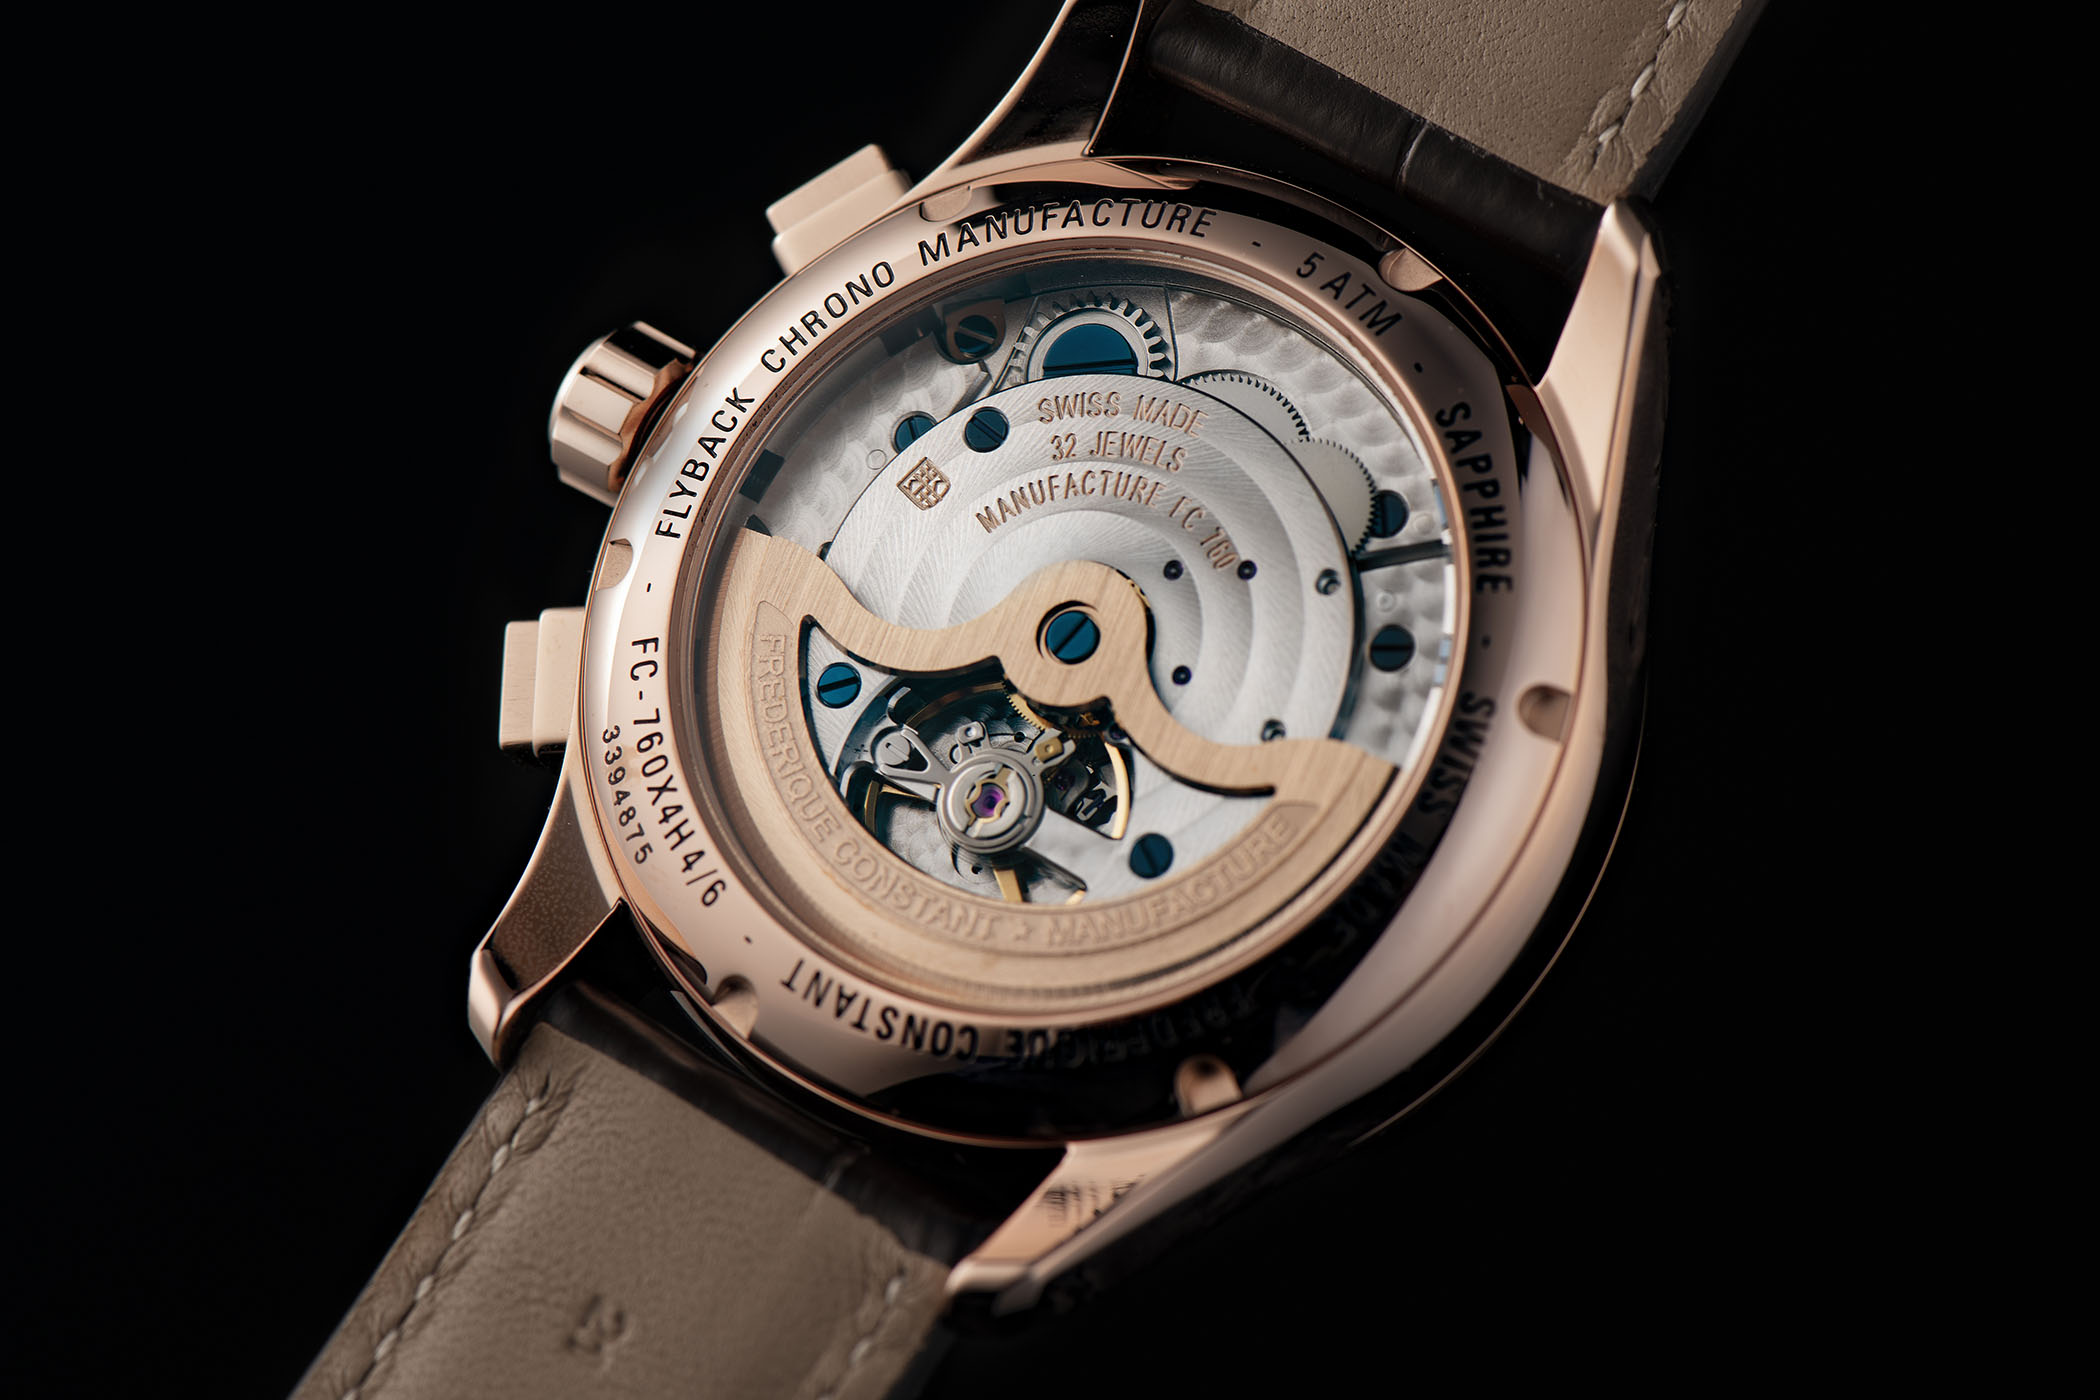 Frederique Constant Flyback Chronograph Manufacture